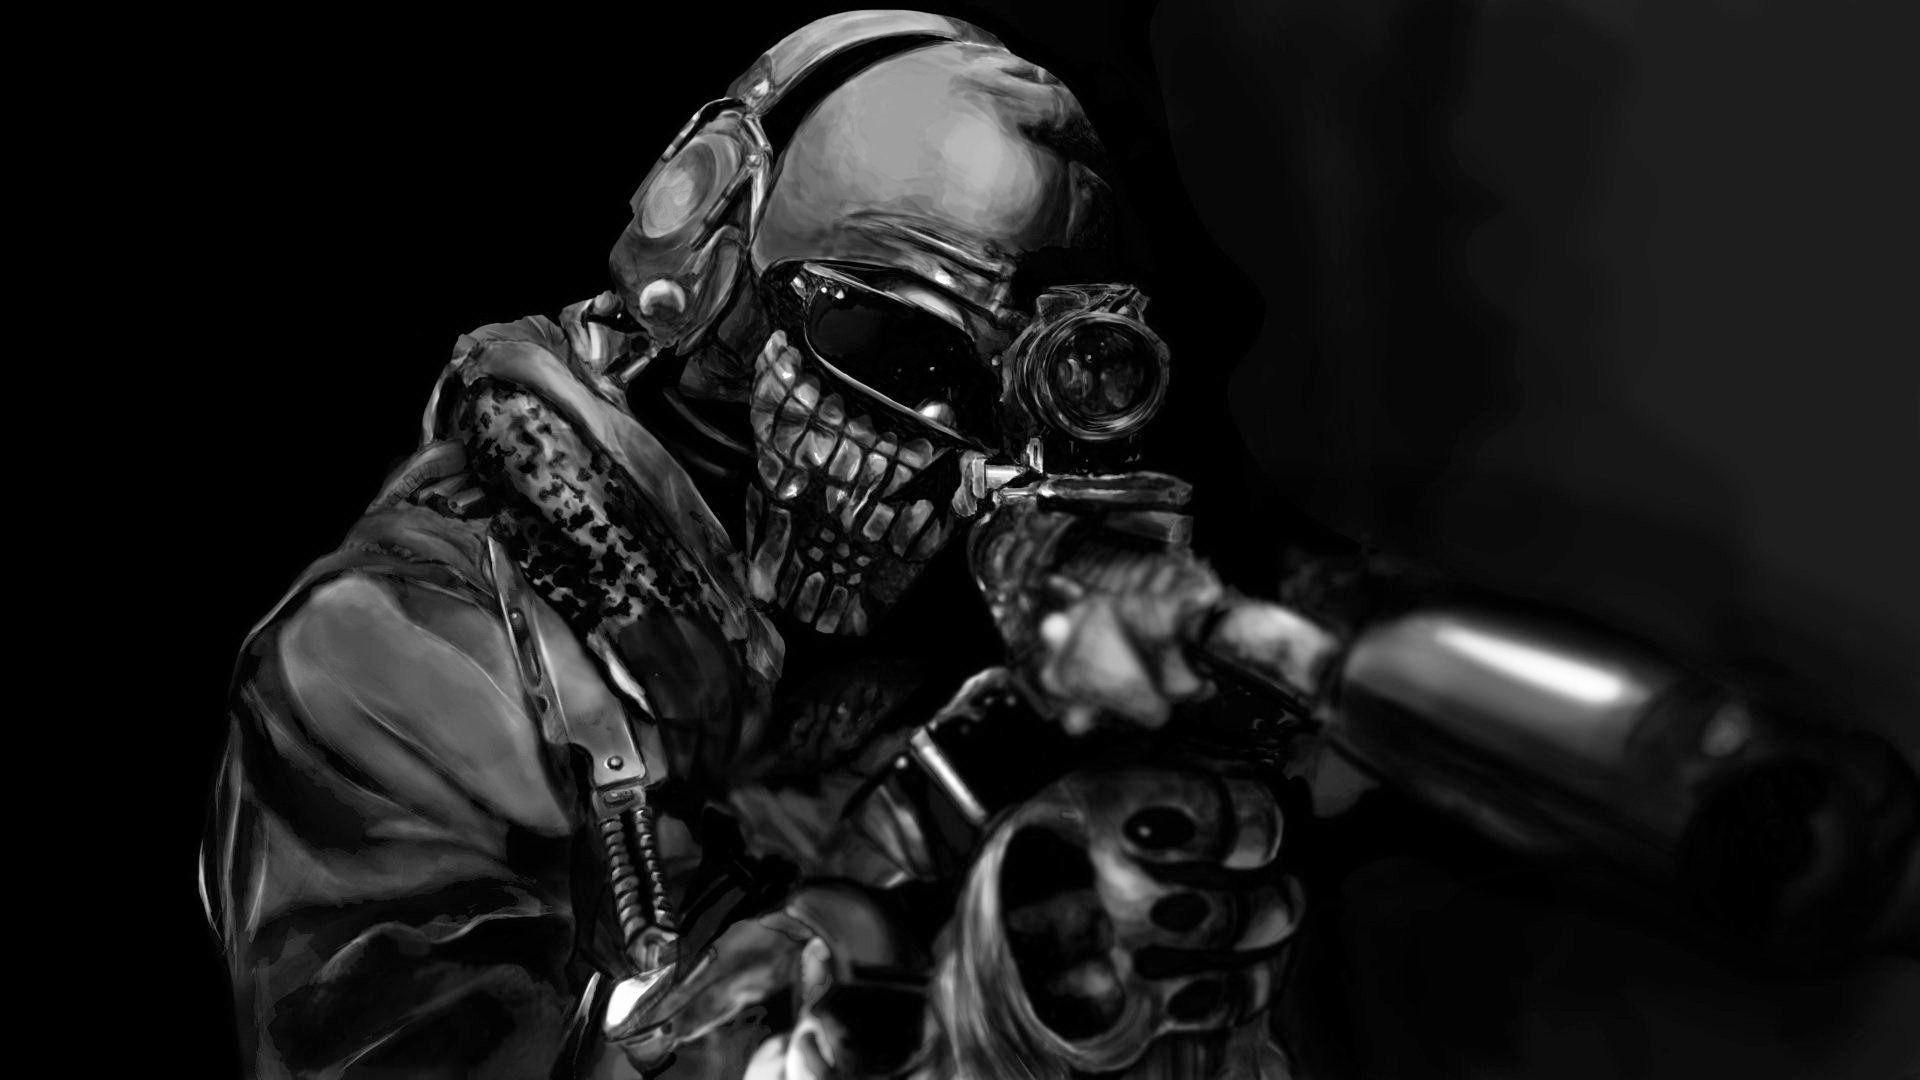 Call of Duty Ghosts Wallpaper 1920x1080 in HD. Call of Duty